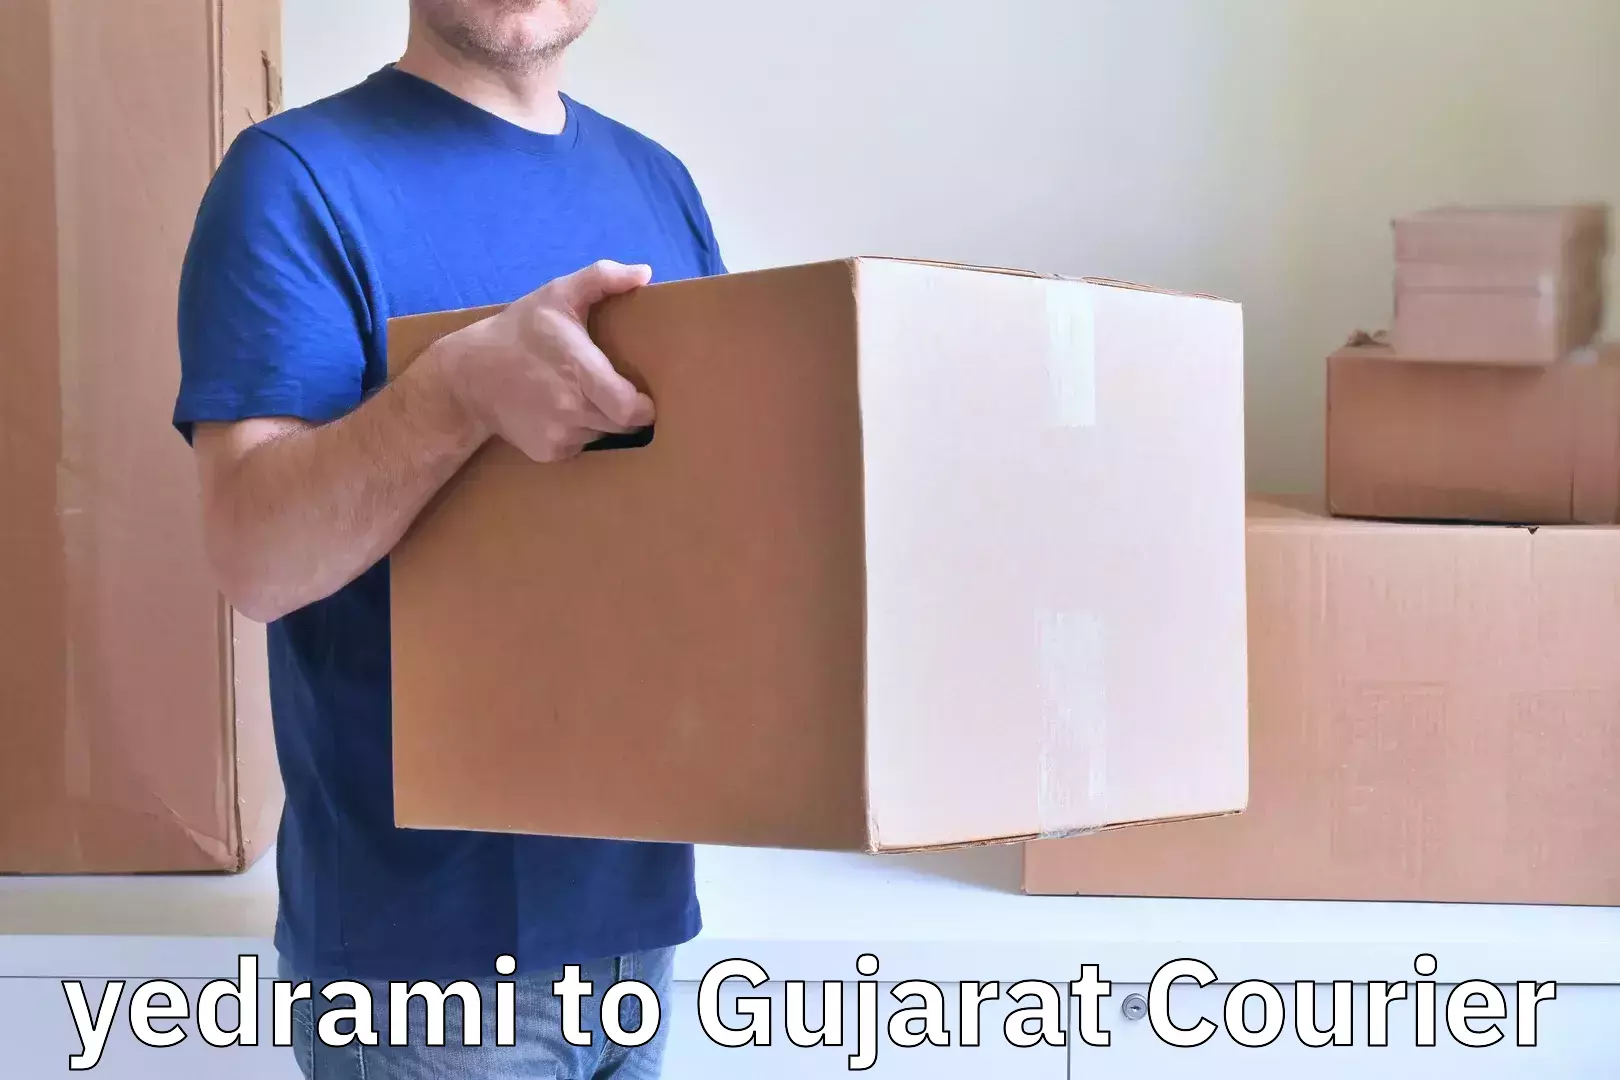 Personal baggage courier yedrami to Gujarat